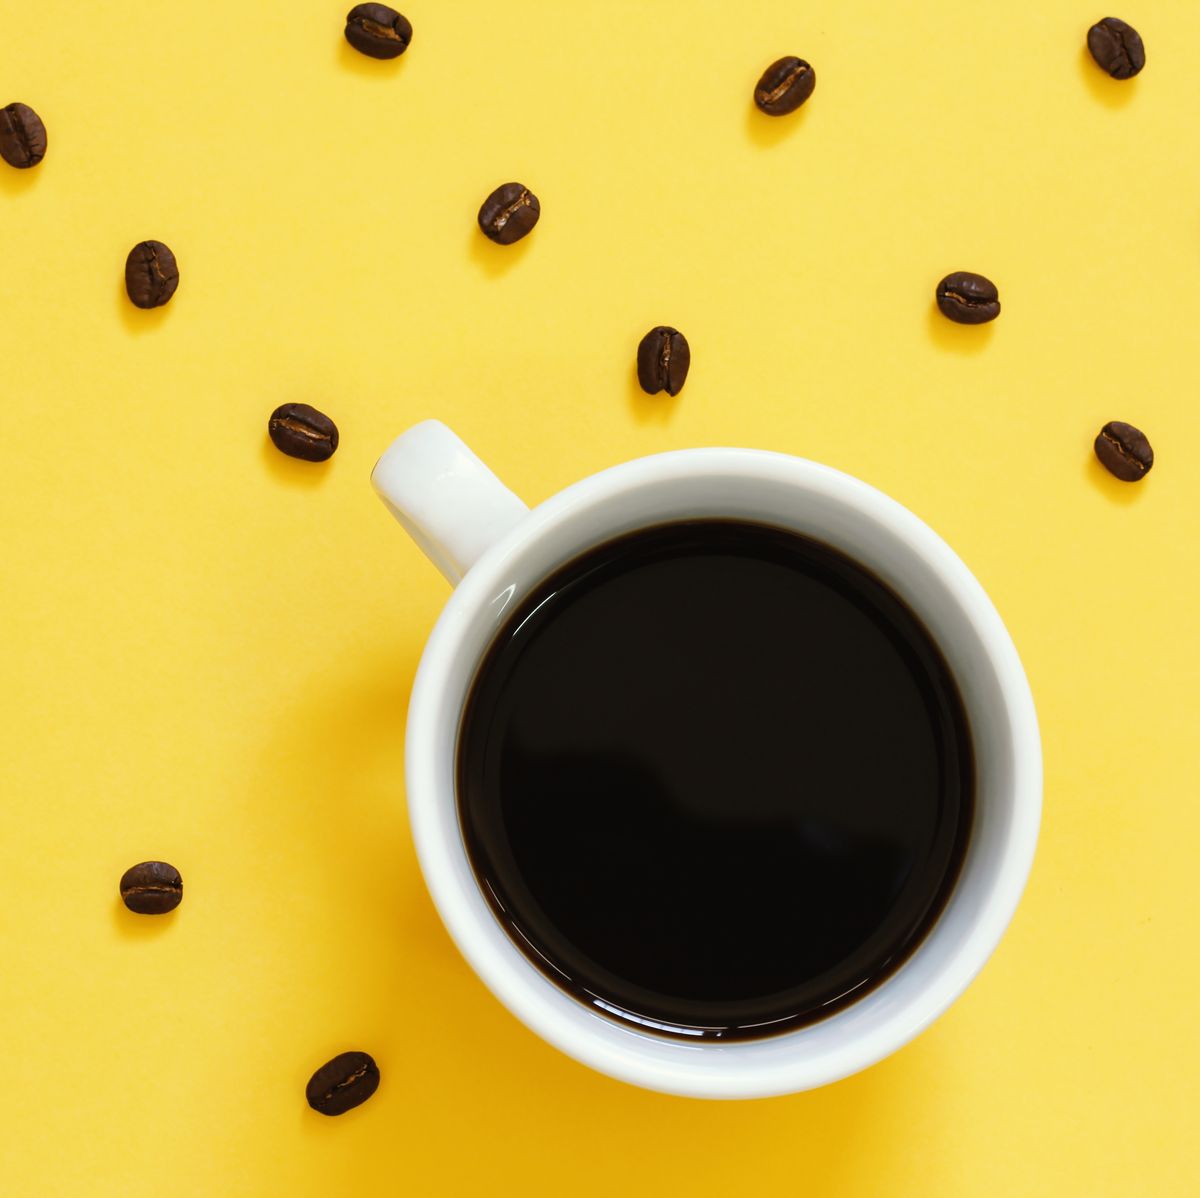 Top view of black coffee and beans on yellow background